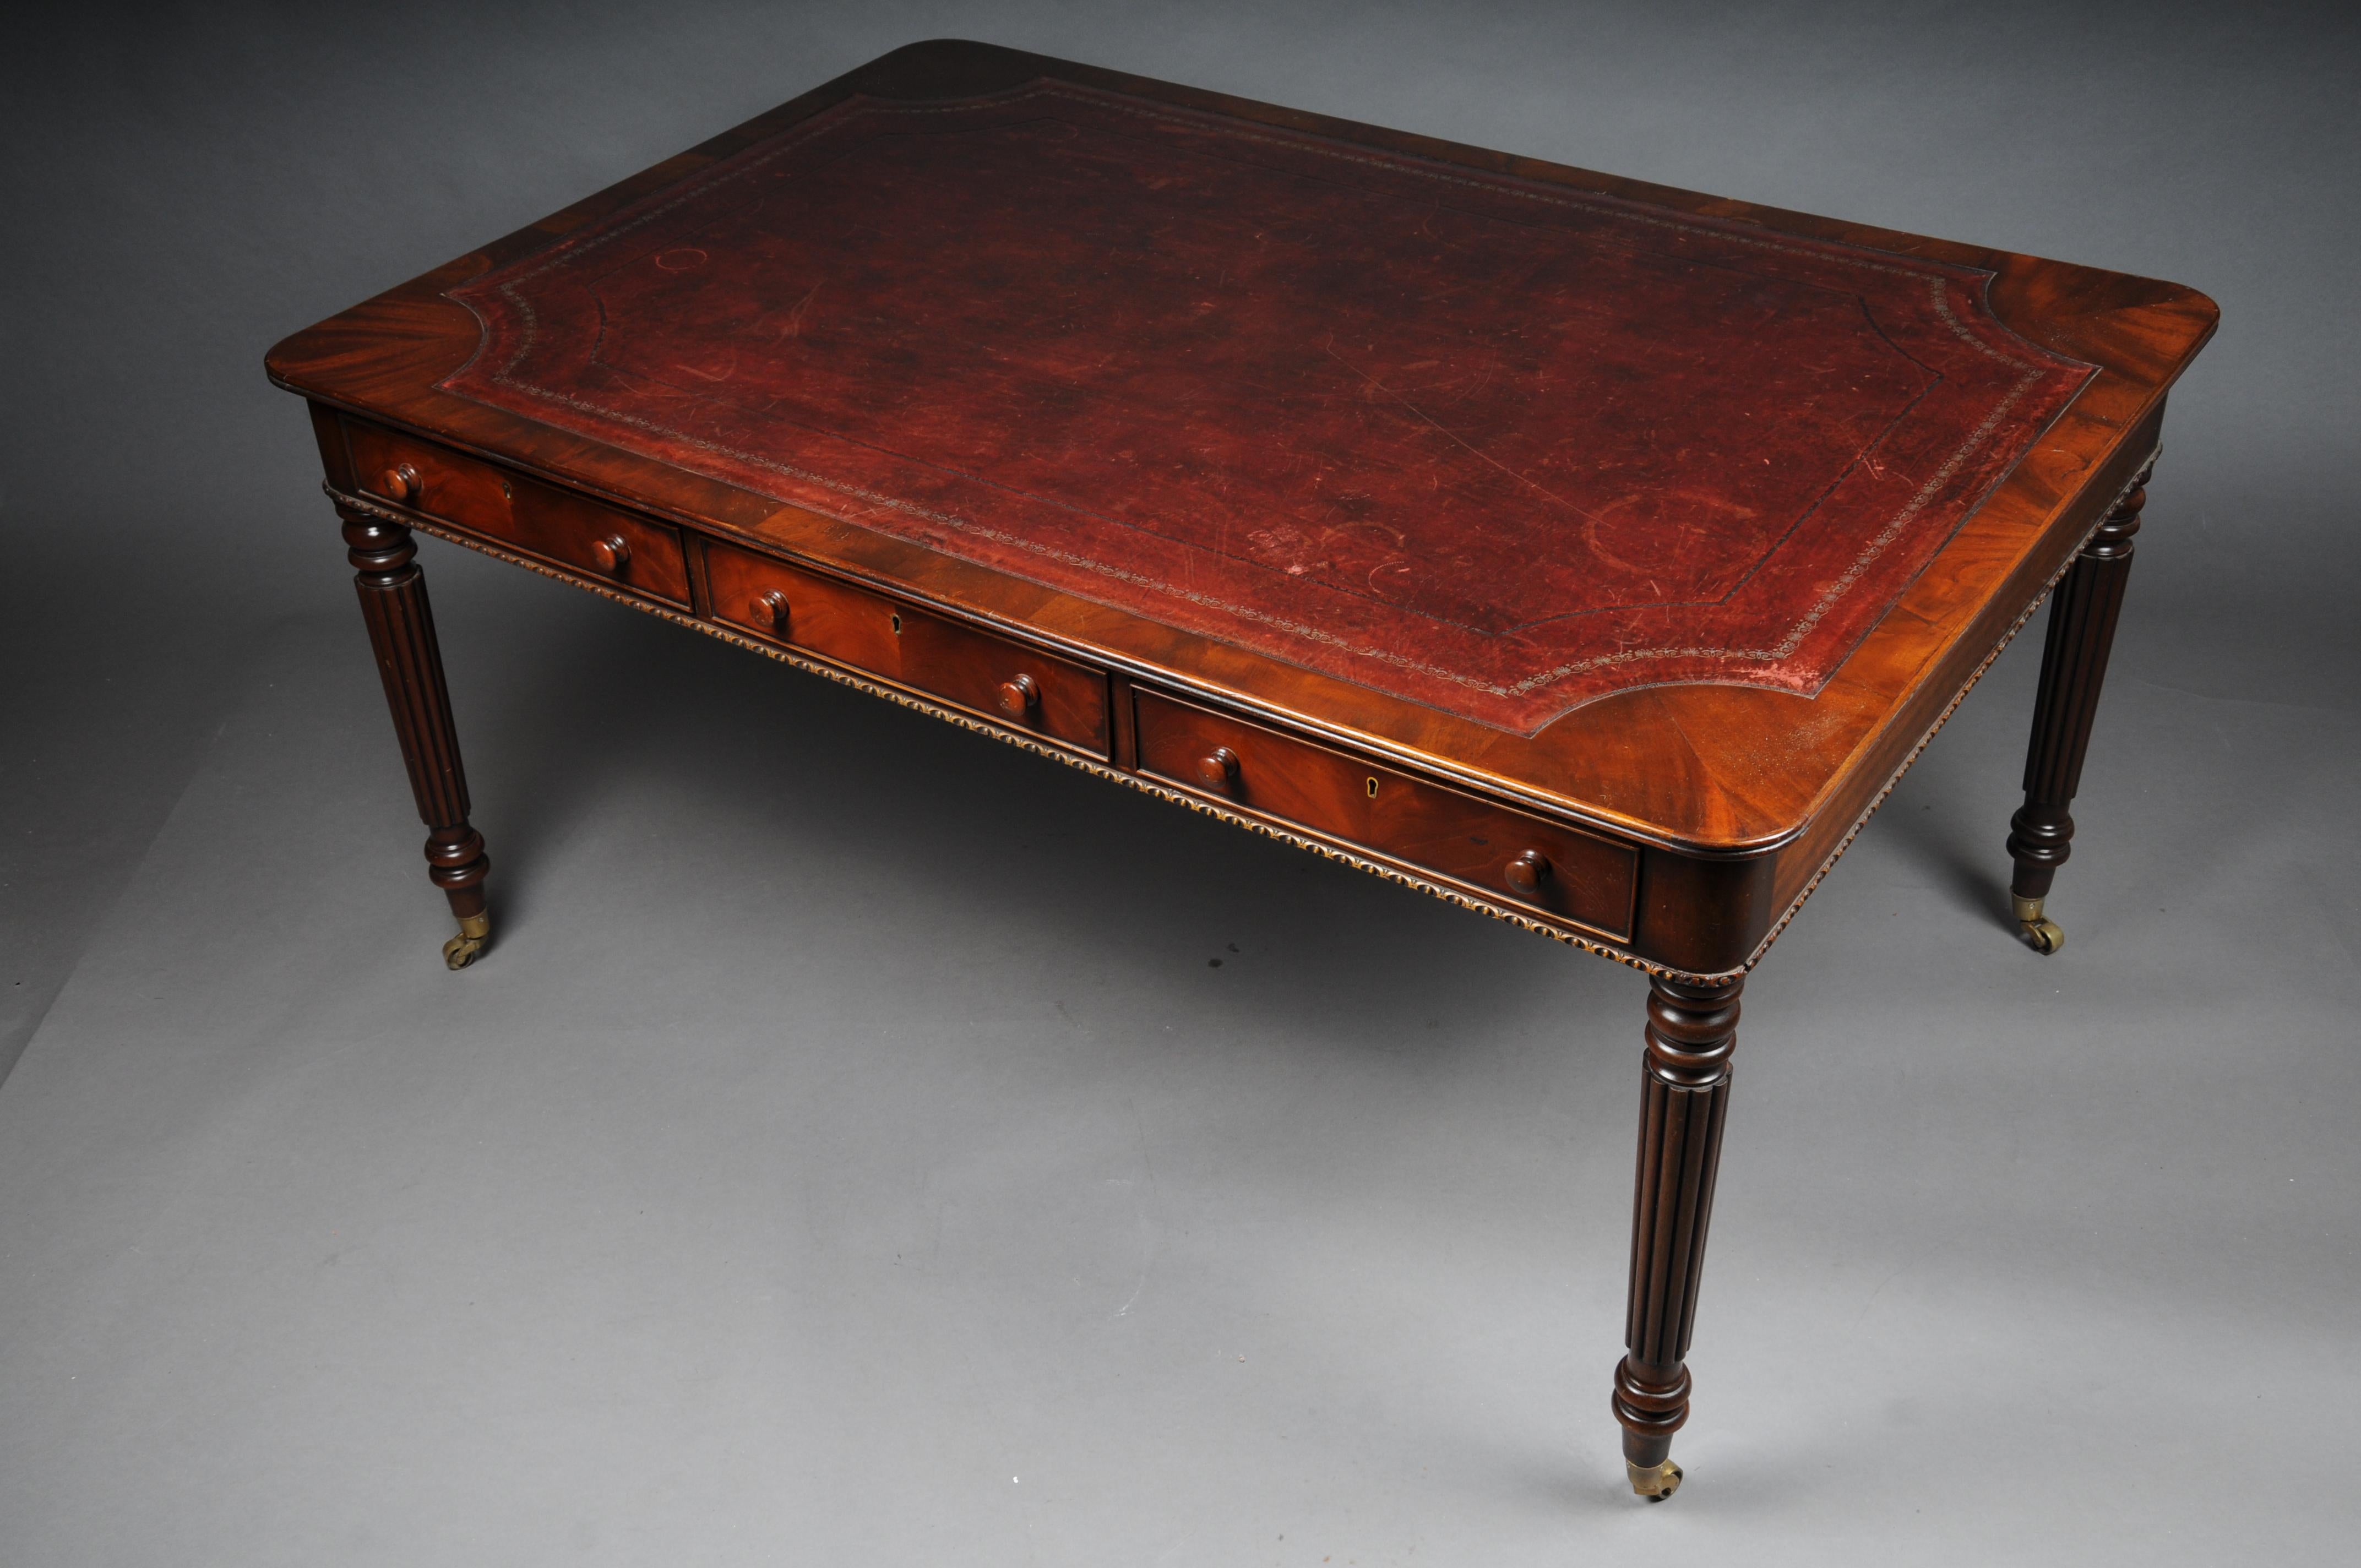 Large Victorian Partner Desk, England, 19th Century, Mahogany with Leather For Sale 2